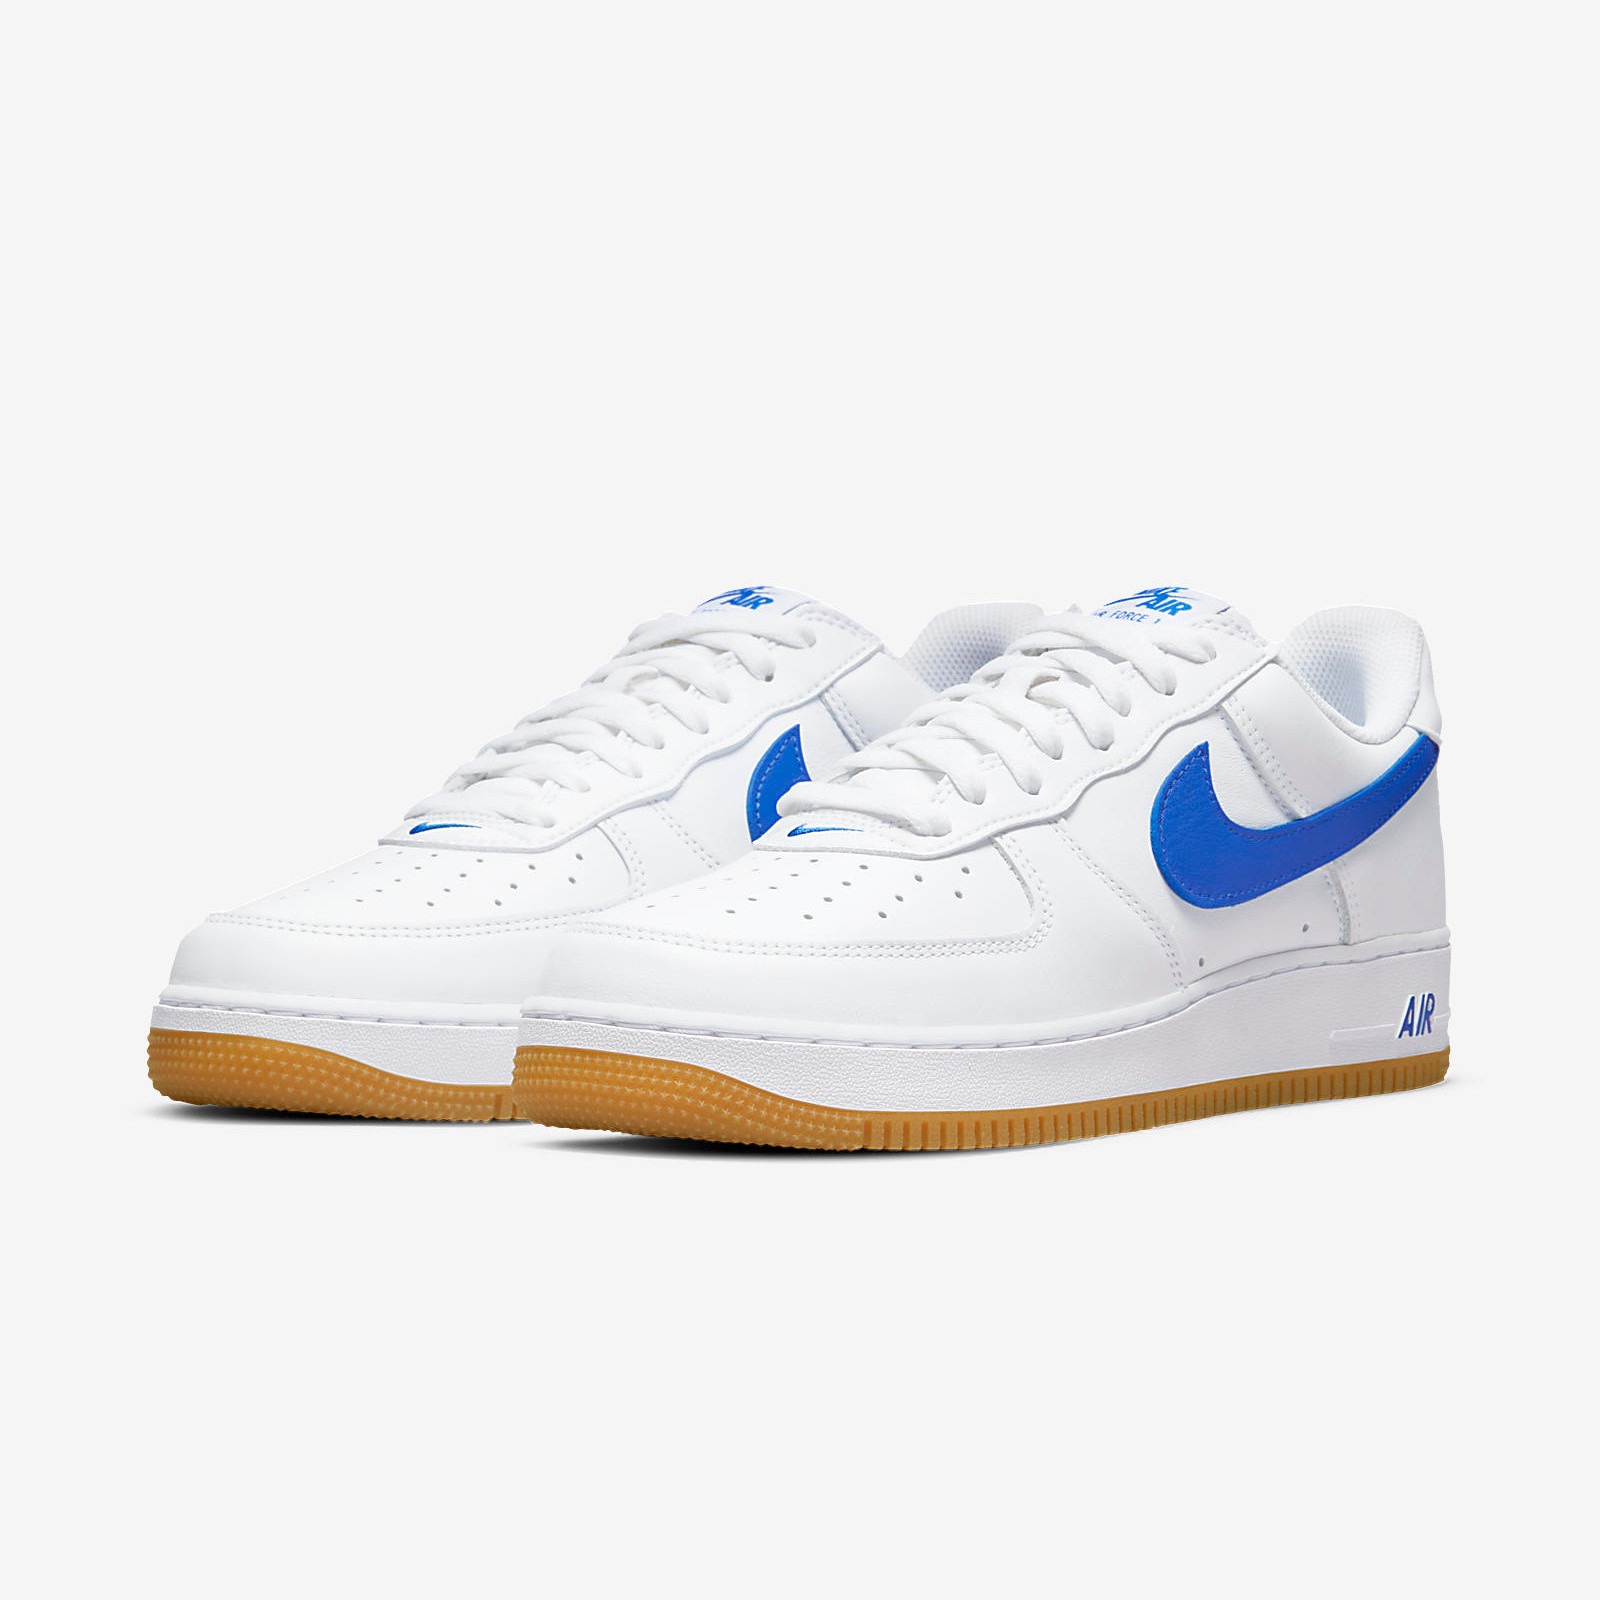 Nike Air Force 1 Low
Color of the Month
« Varsity Royal »